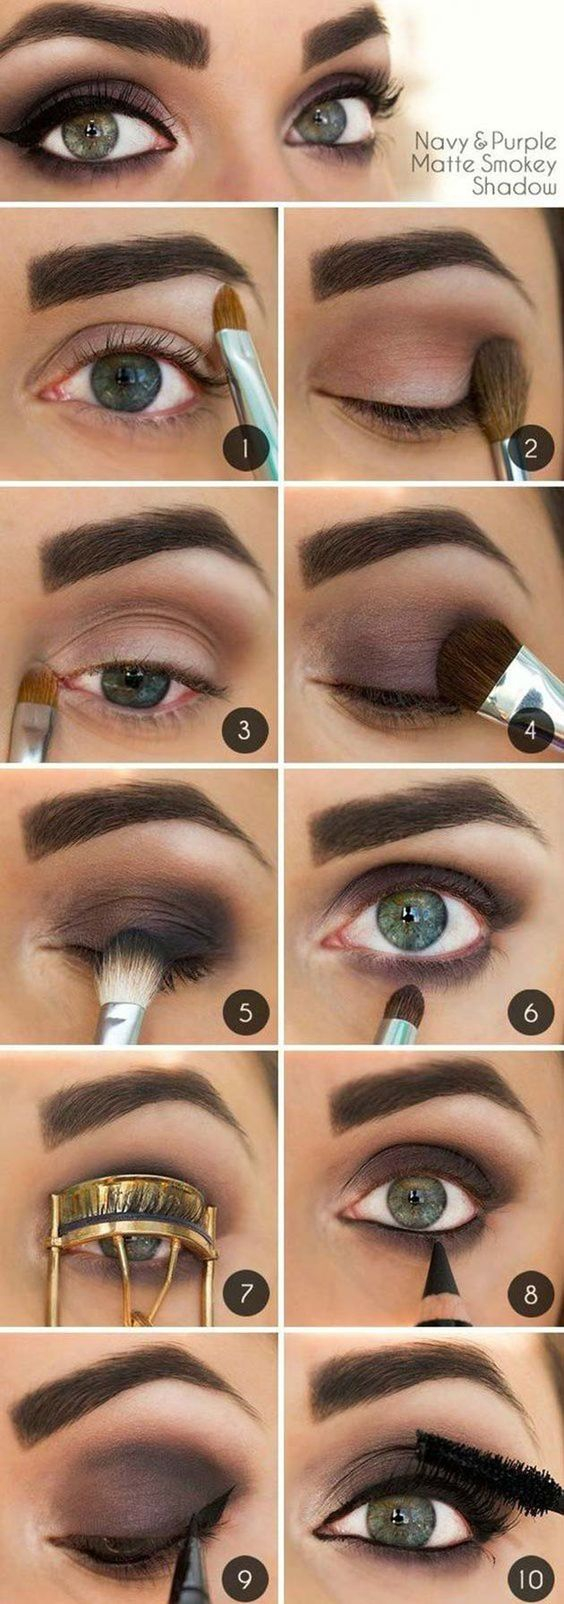 Best Eye Makeup For Green Eyes 10 Step Step Makeup Tutorials For Green Eyes Her Style Code